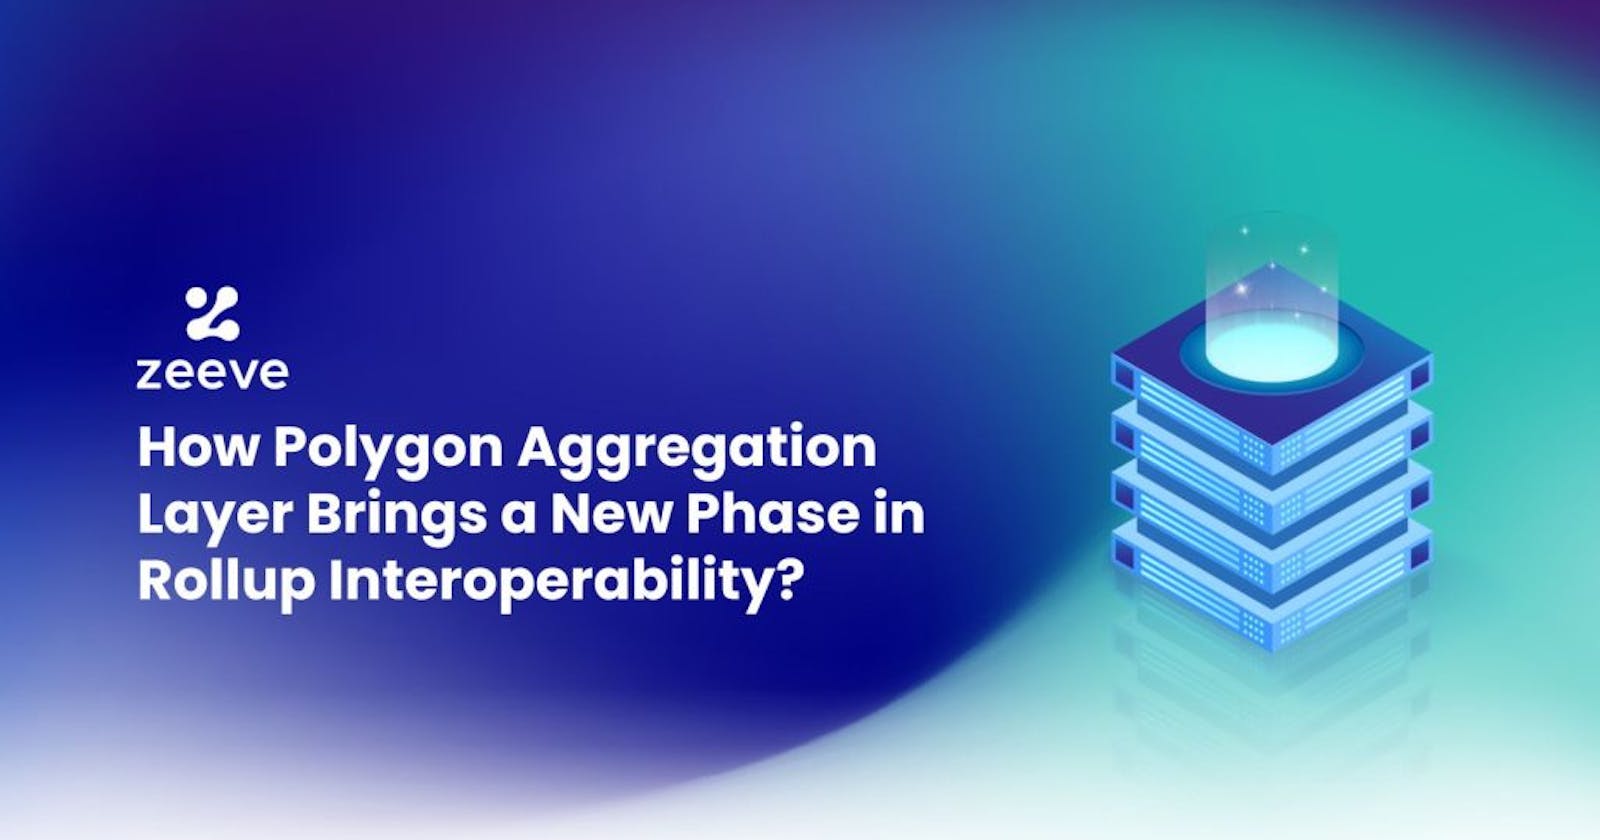 How Polygon’s Aggregation Layer Brings a New Phase in Rollup Interoperability?